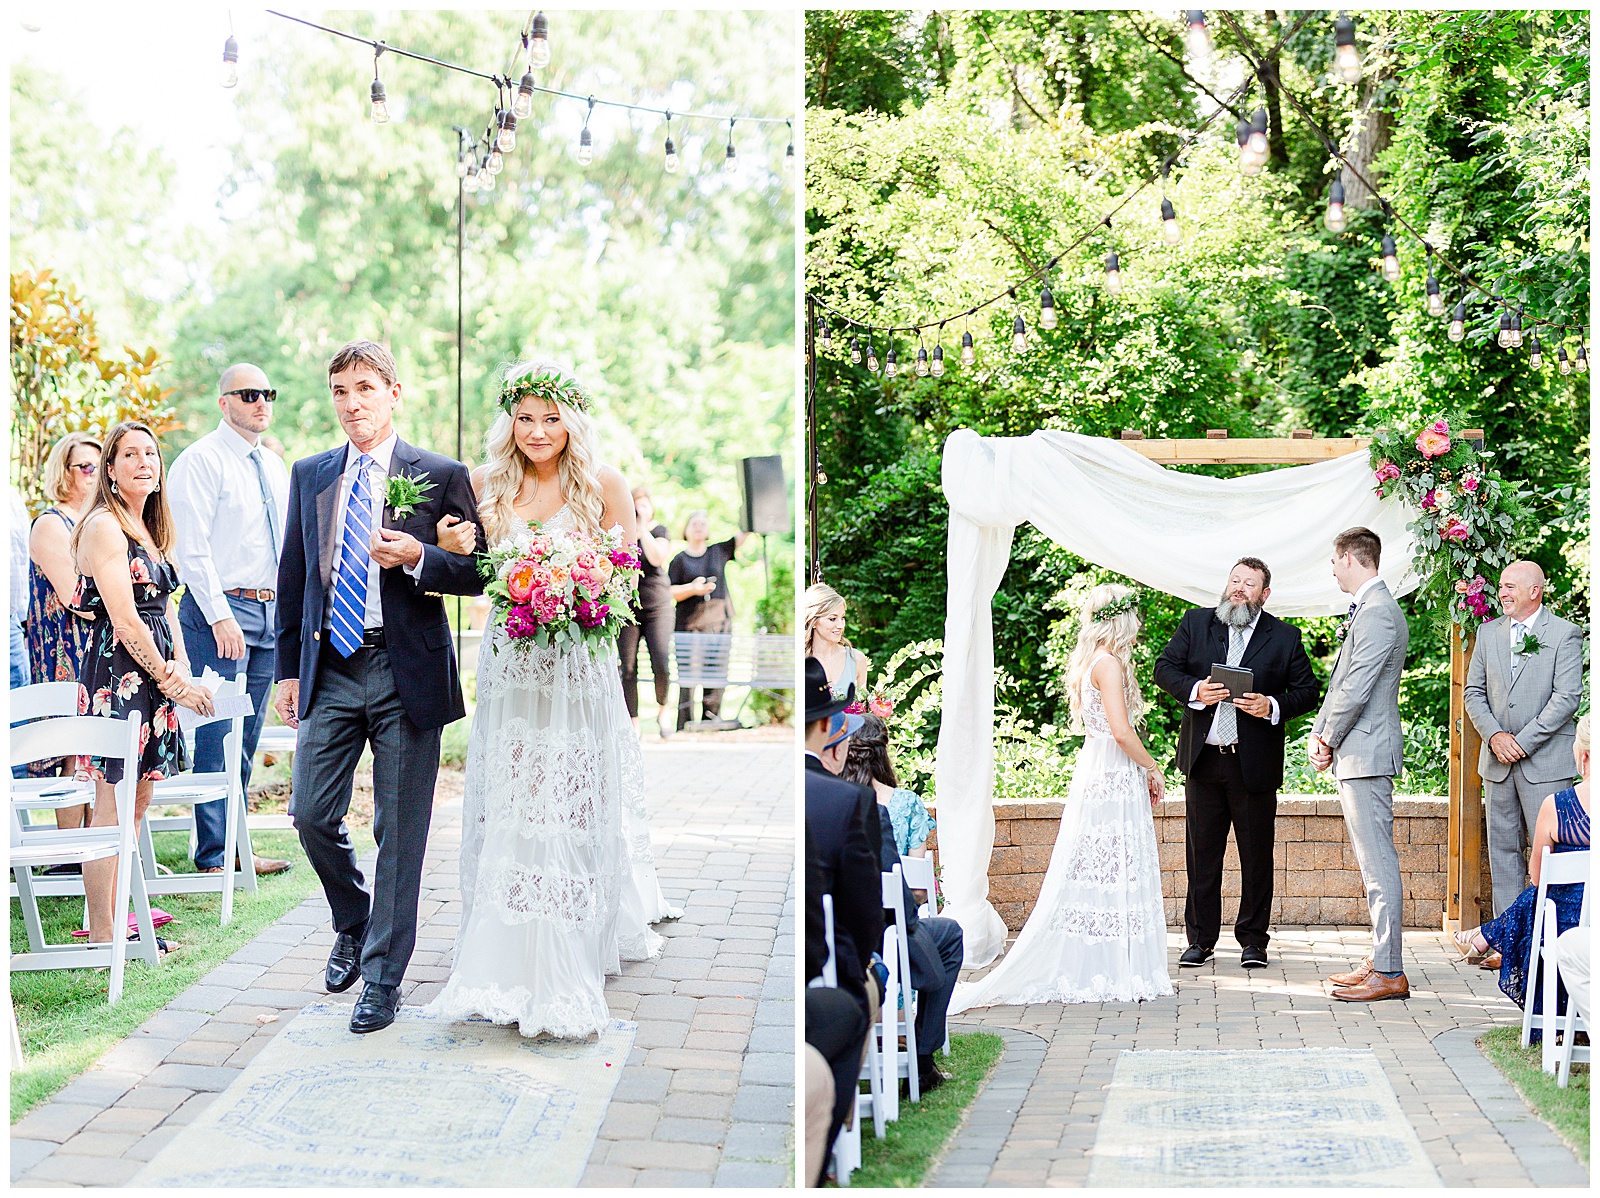 Bohemian Bride Ceremony from Boho Chic Summer Wedding in Charlotte, NC | check out the full wedding at KevynDixonPhoto.com 